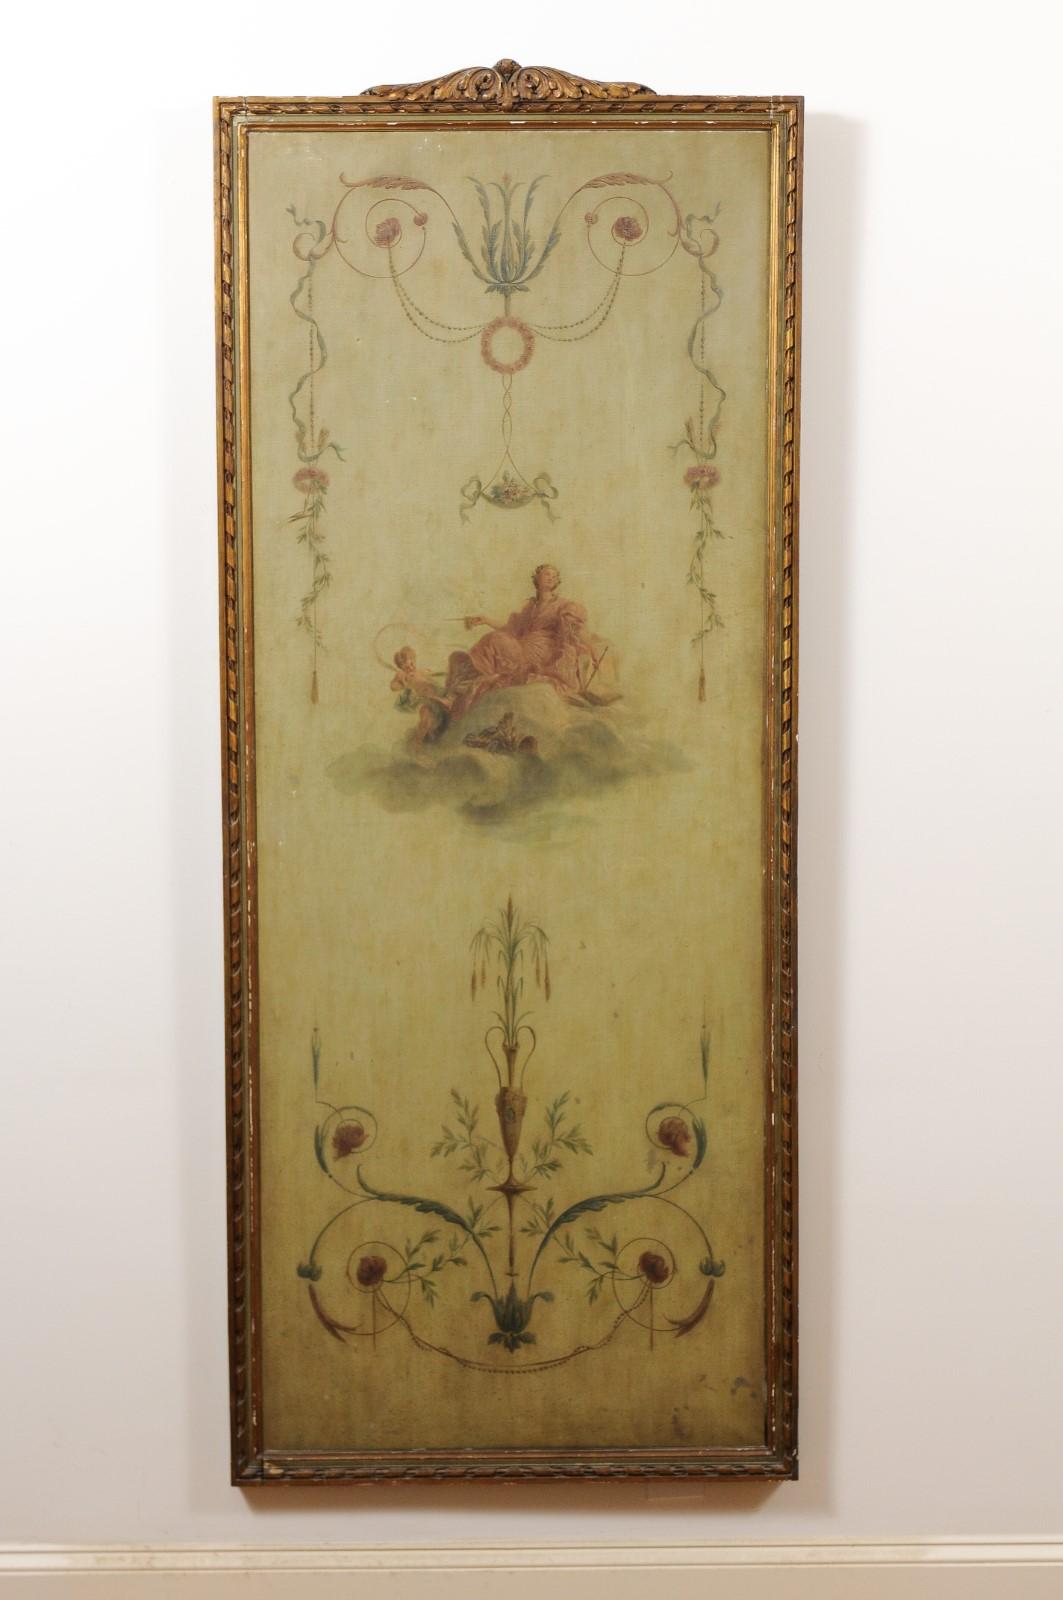 A French Napoléon III period framed architectural oil on canvas panel from the mid 19th century, with Allegory of the Arts and rinceaux motifs. Created in France at the beginning of Emperor Napoléon III's reign, this architectural panel captures our